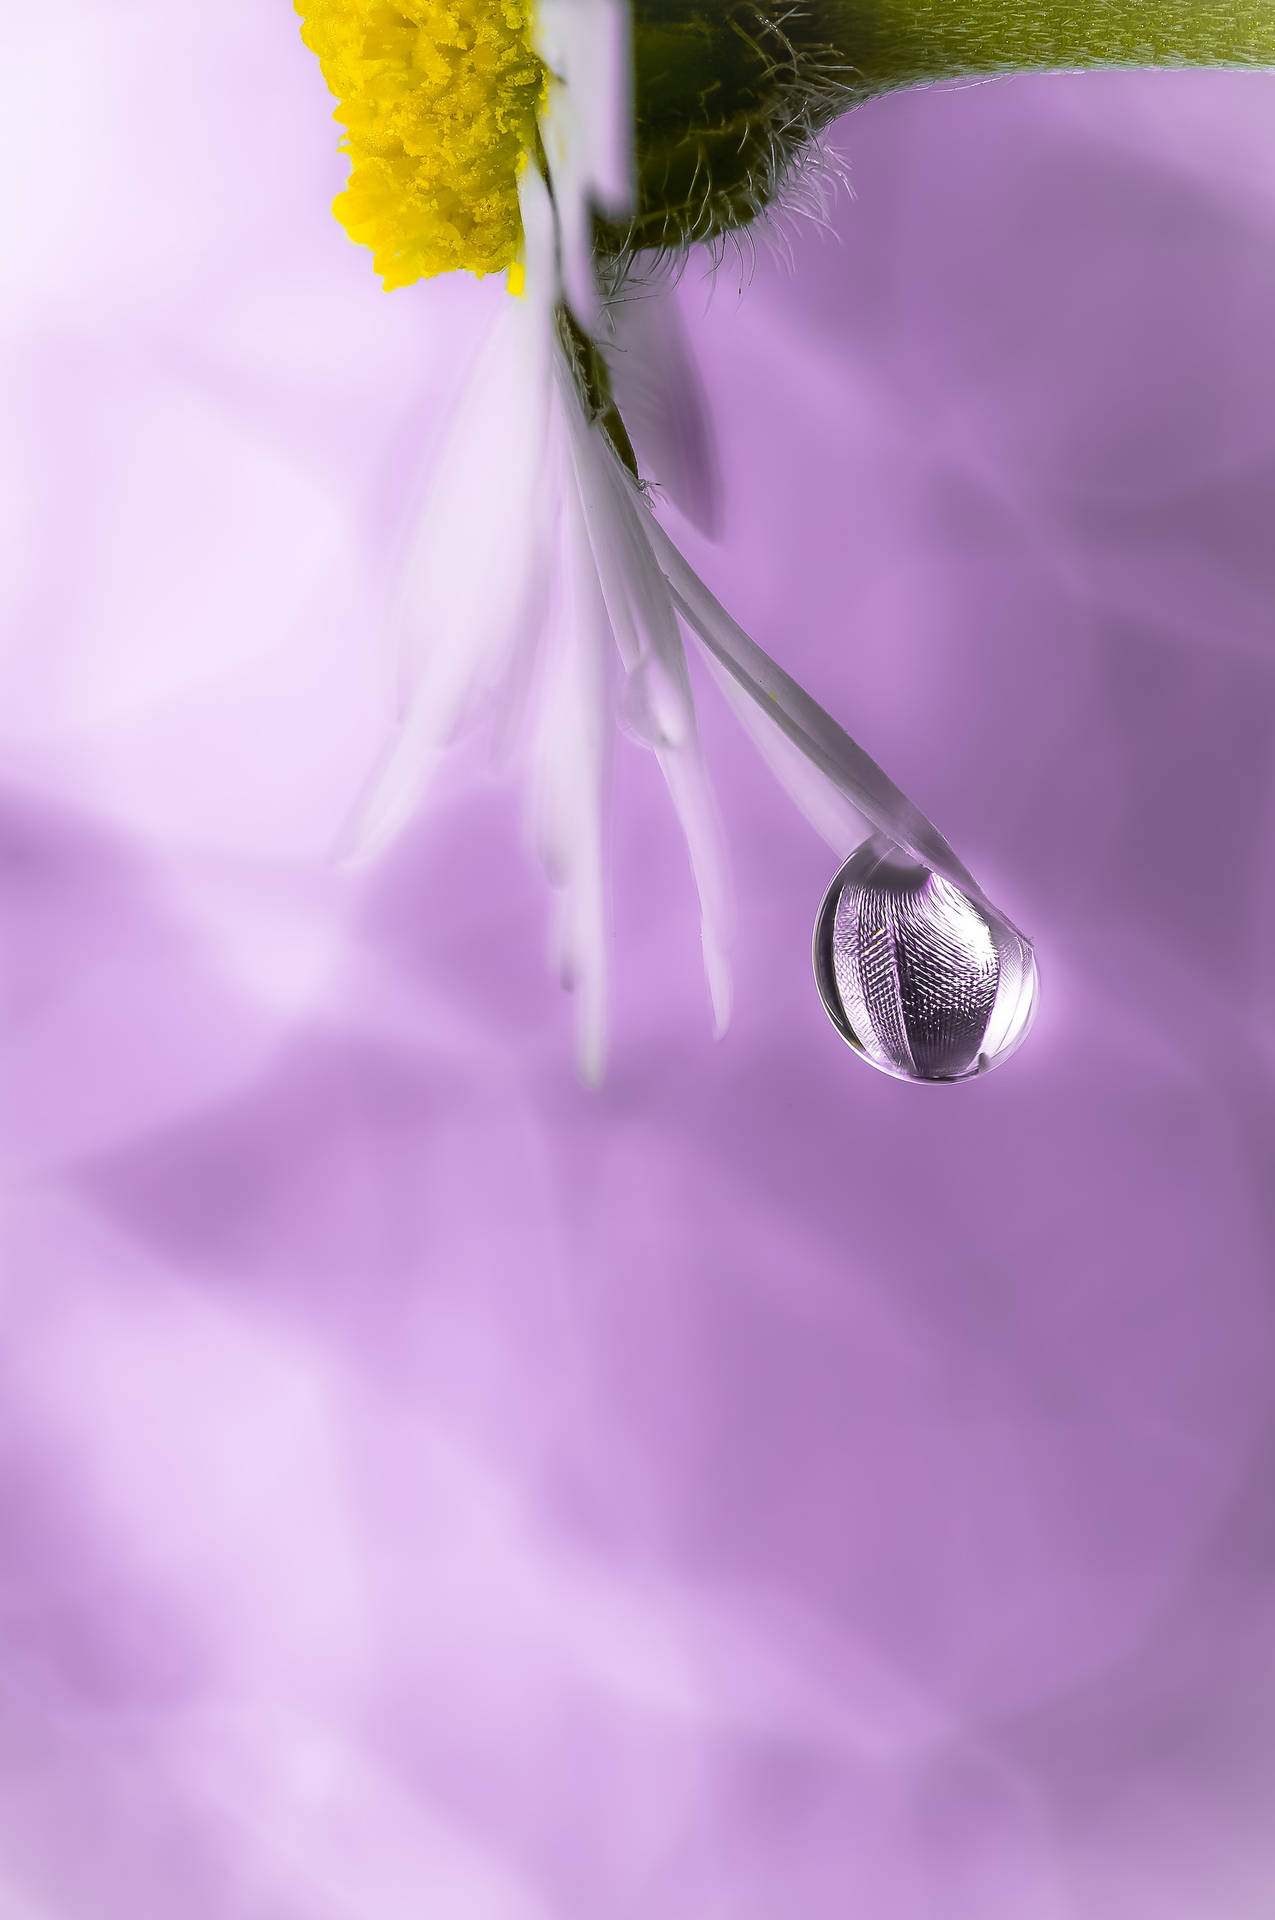 Water Droplet Flower Petal Android Background